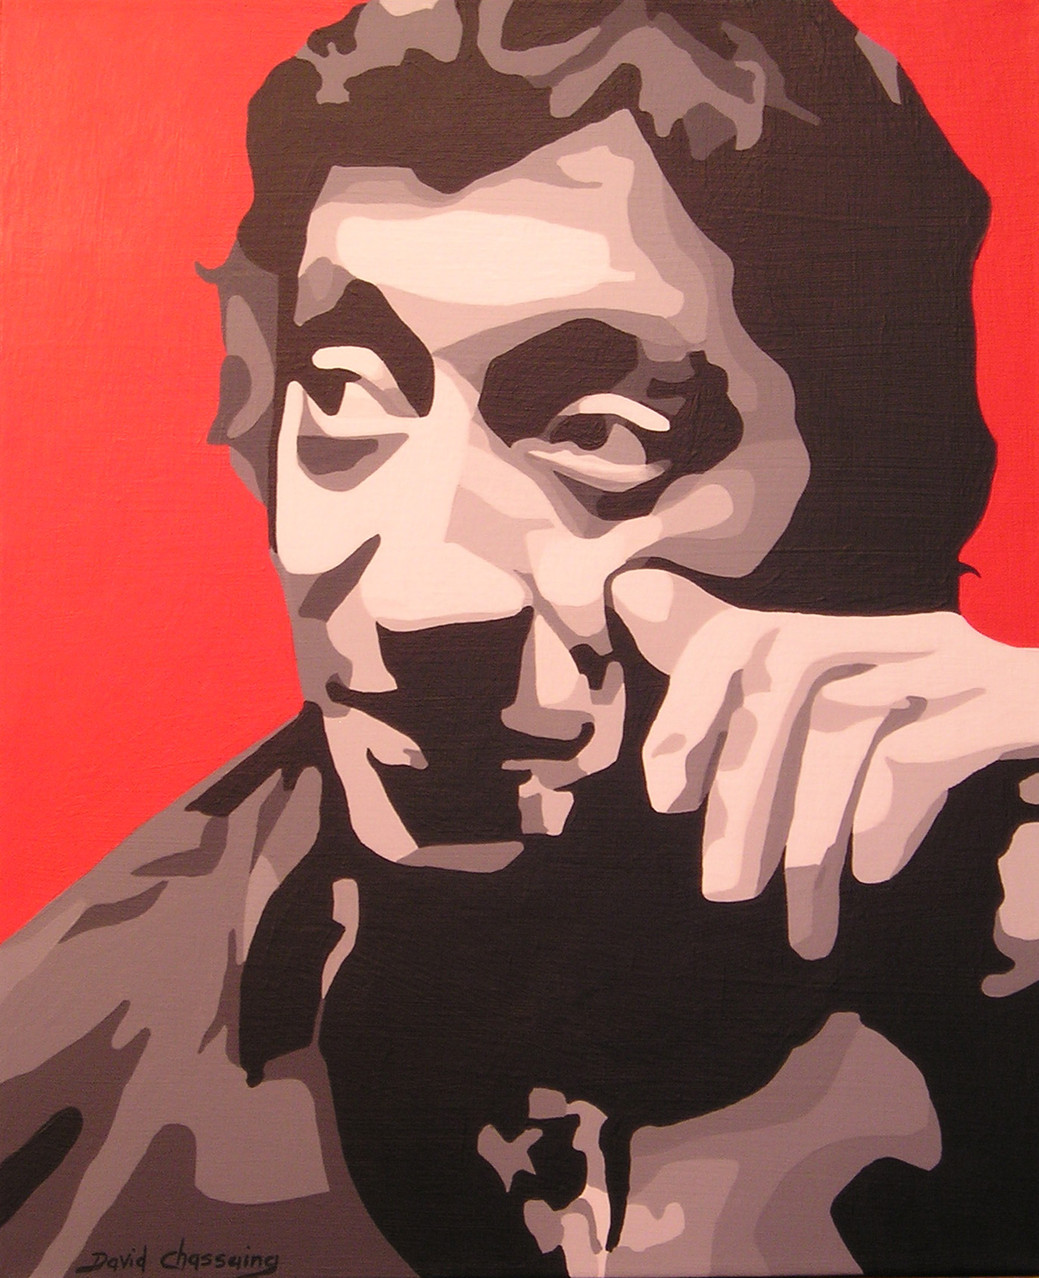 Serge Gainsbourg (Collection privée)